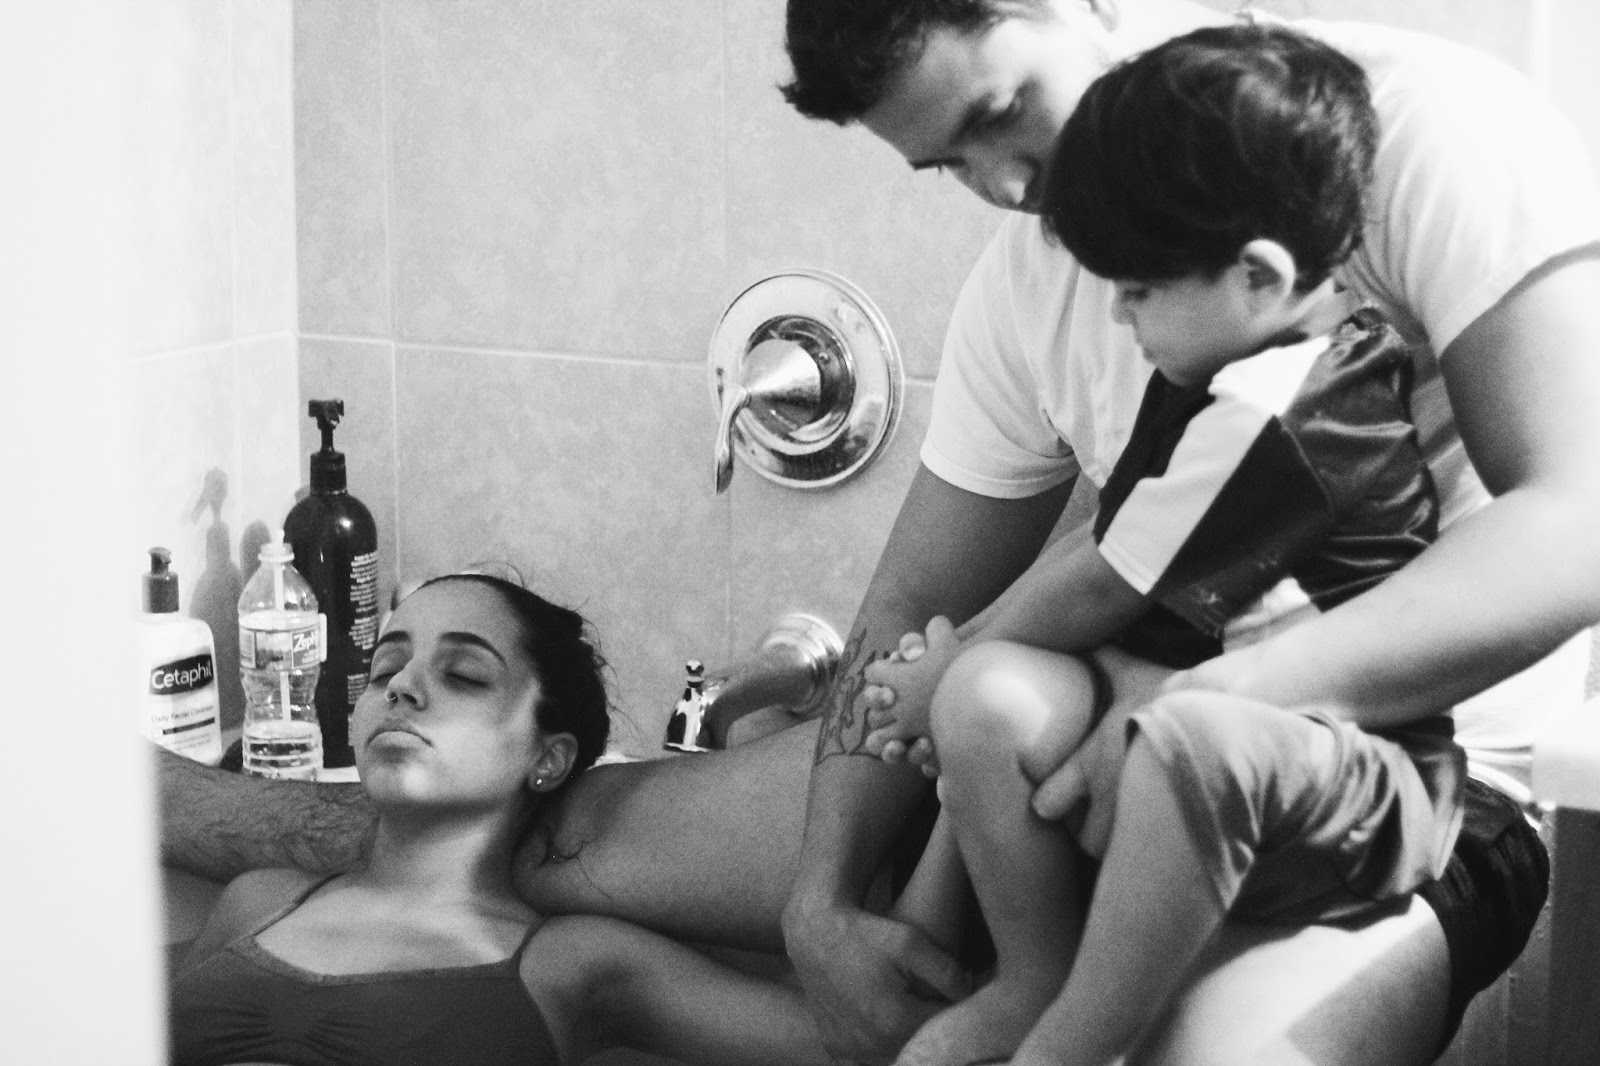 Woman giving water birth lies back in tub while husband sits on edge of tub with son in his lap